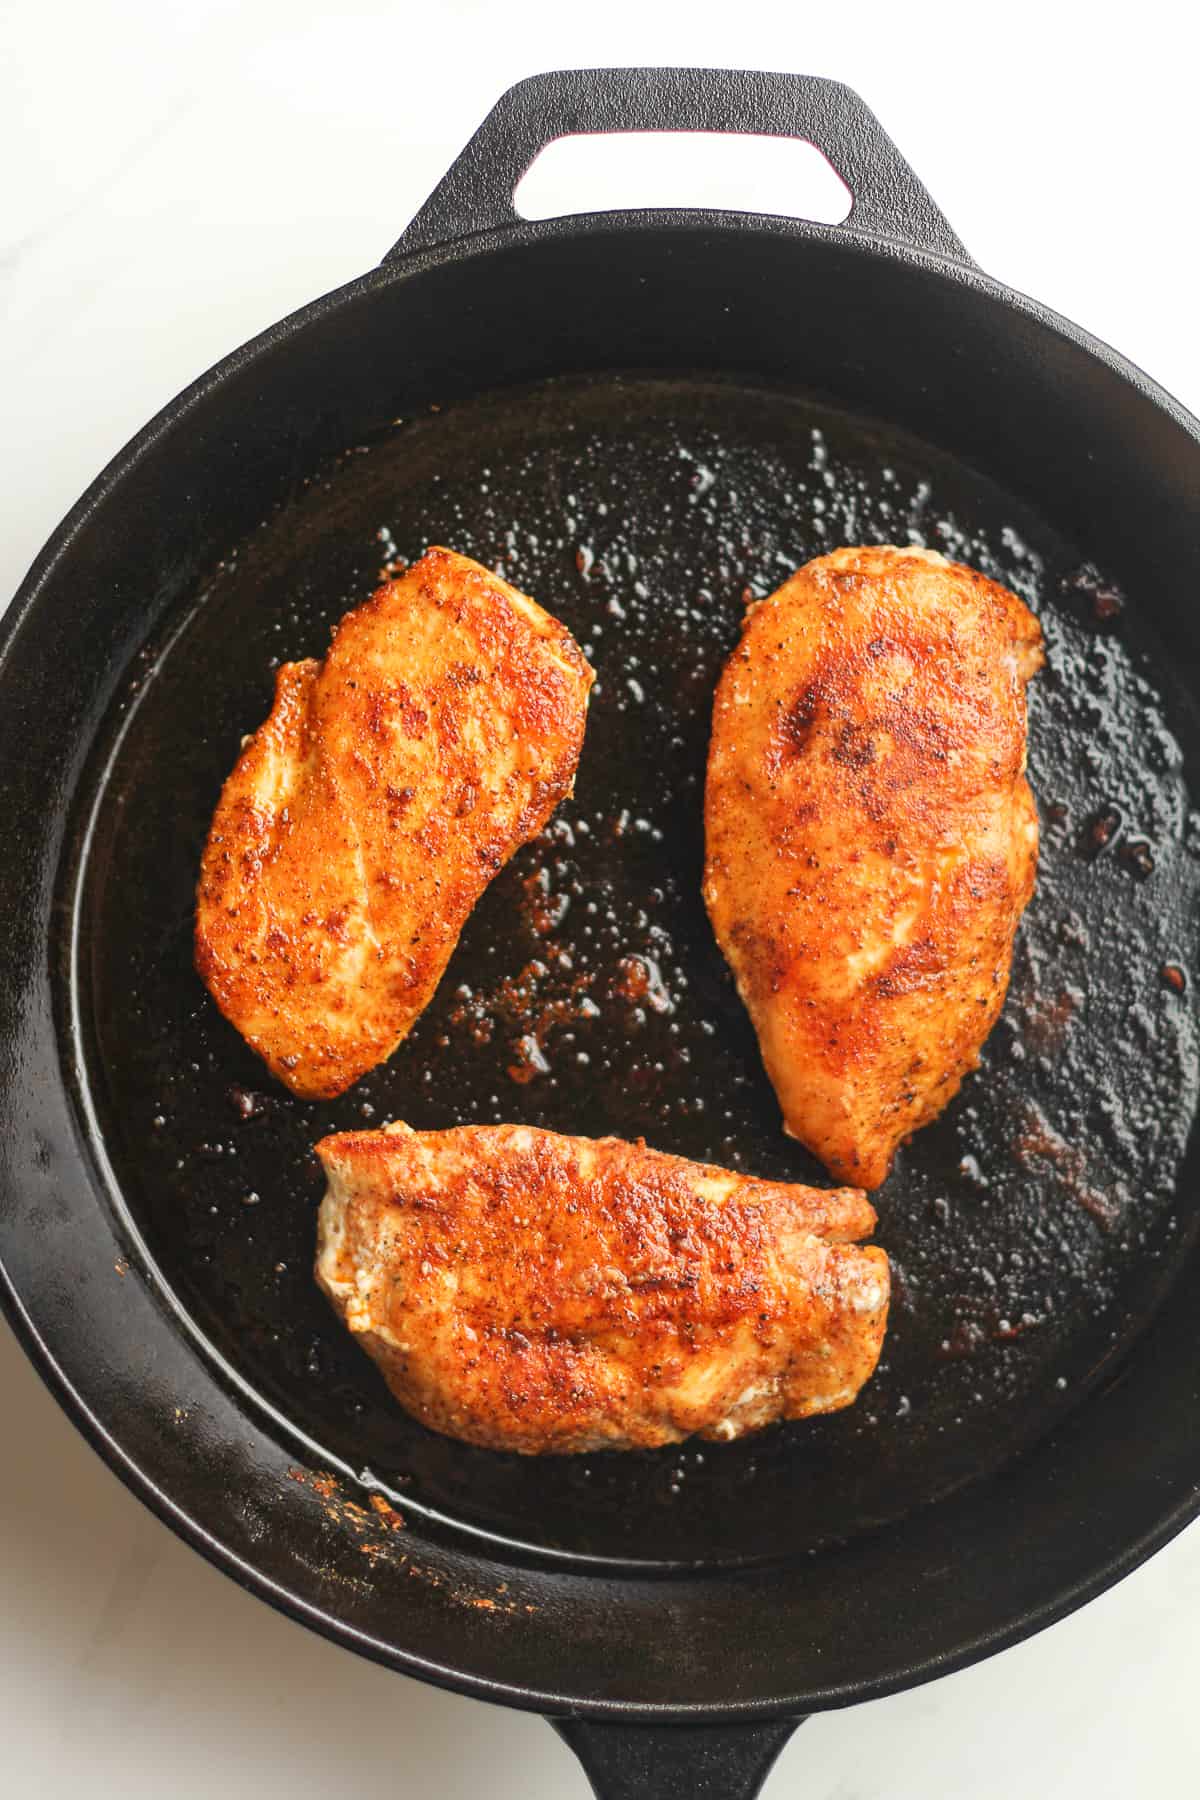 A skillet with three seared chicken breasts.